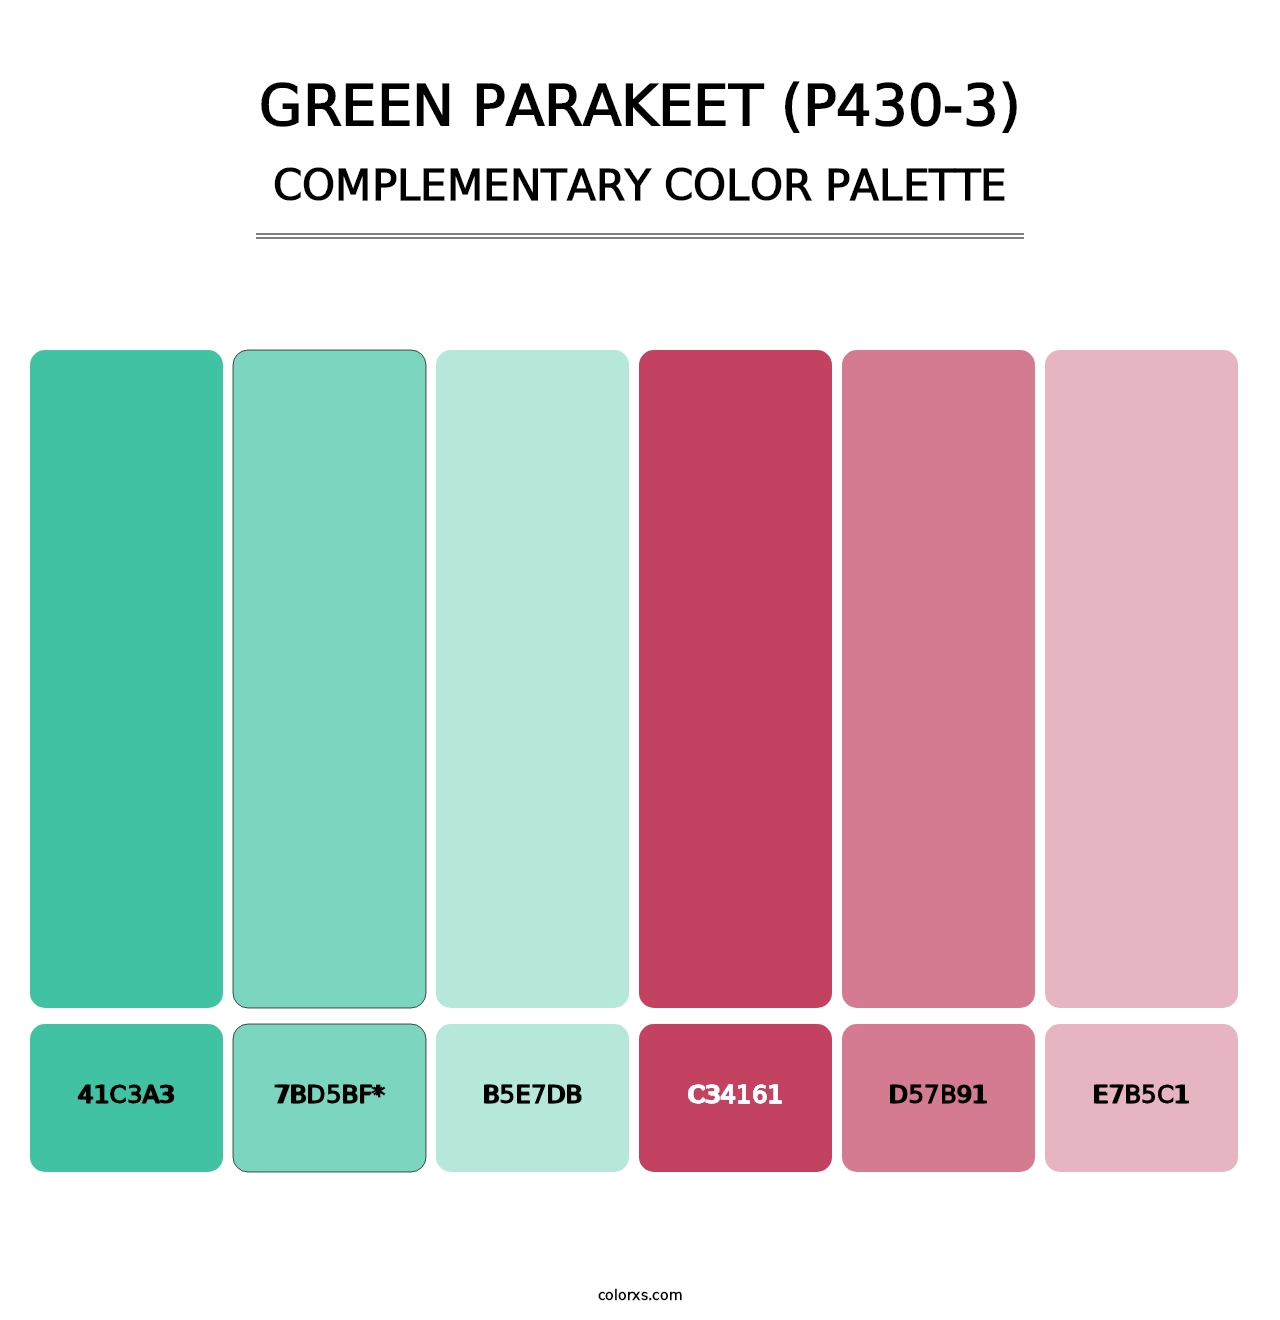 Green Parakeet (P430-3) - Complementary Color Palette